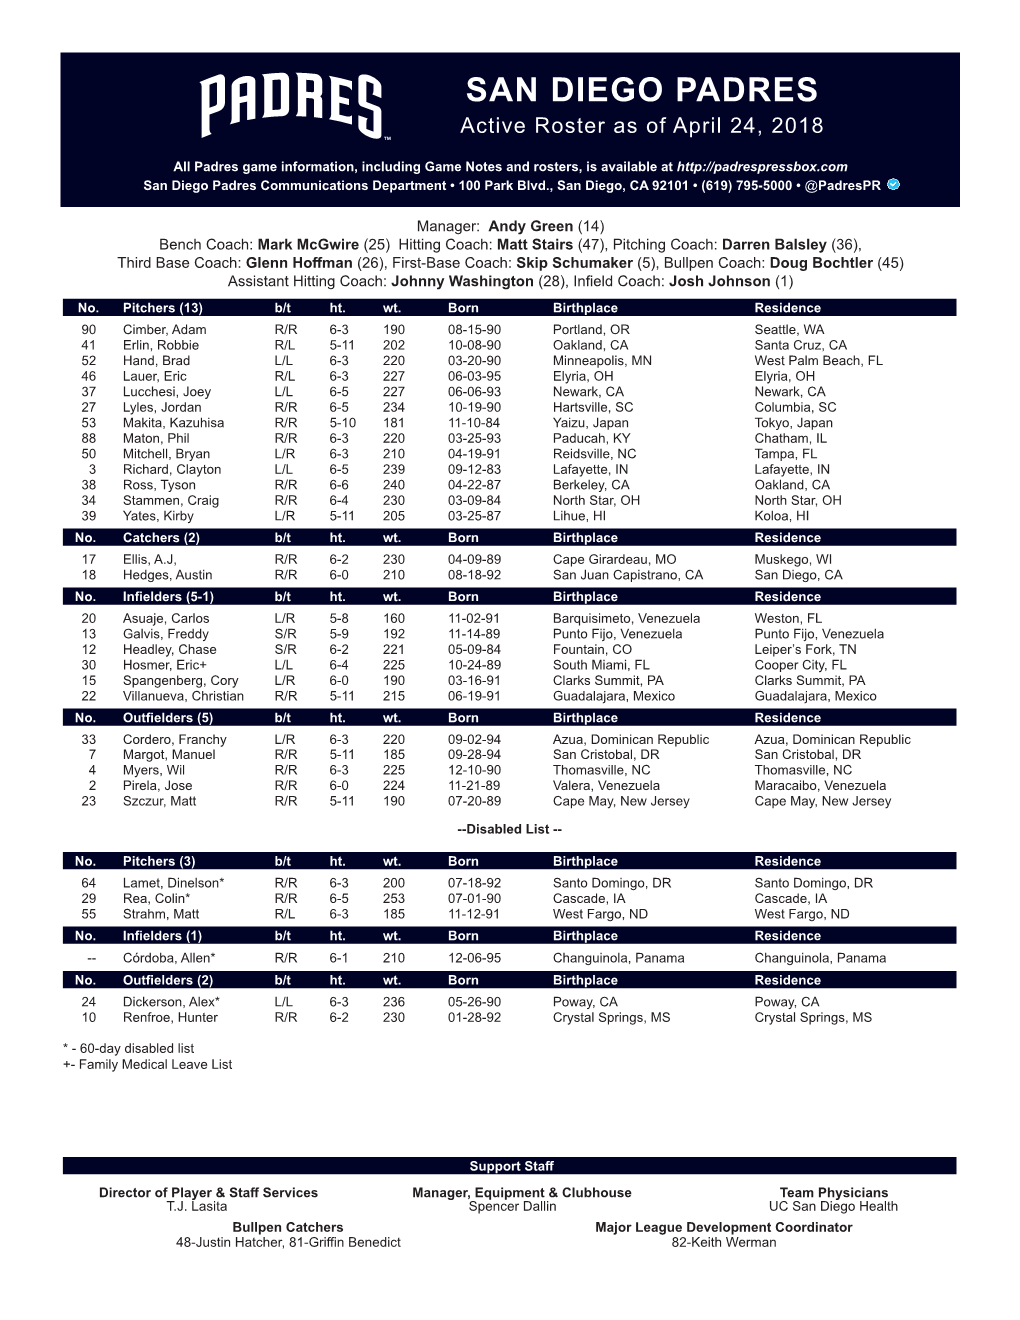 SAN DIEGO PADRES Active Roster As of April 24, 2018